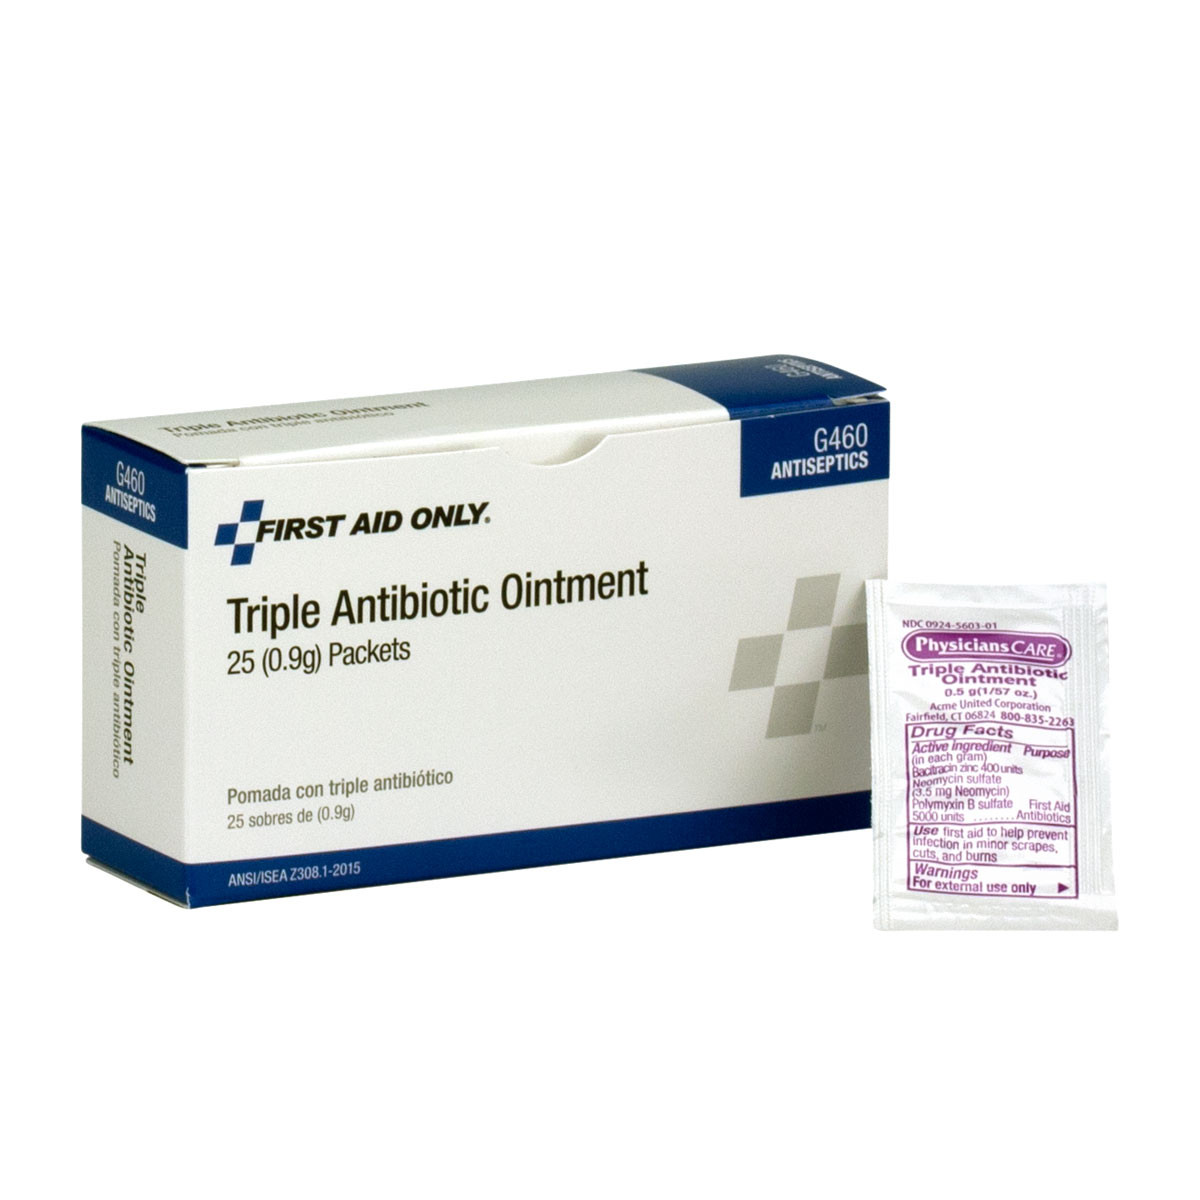 Triple Antibiotic Ointment (0.5g) Packets - First Aid Safety